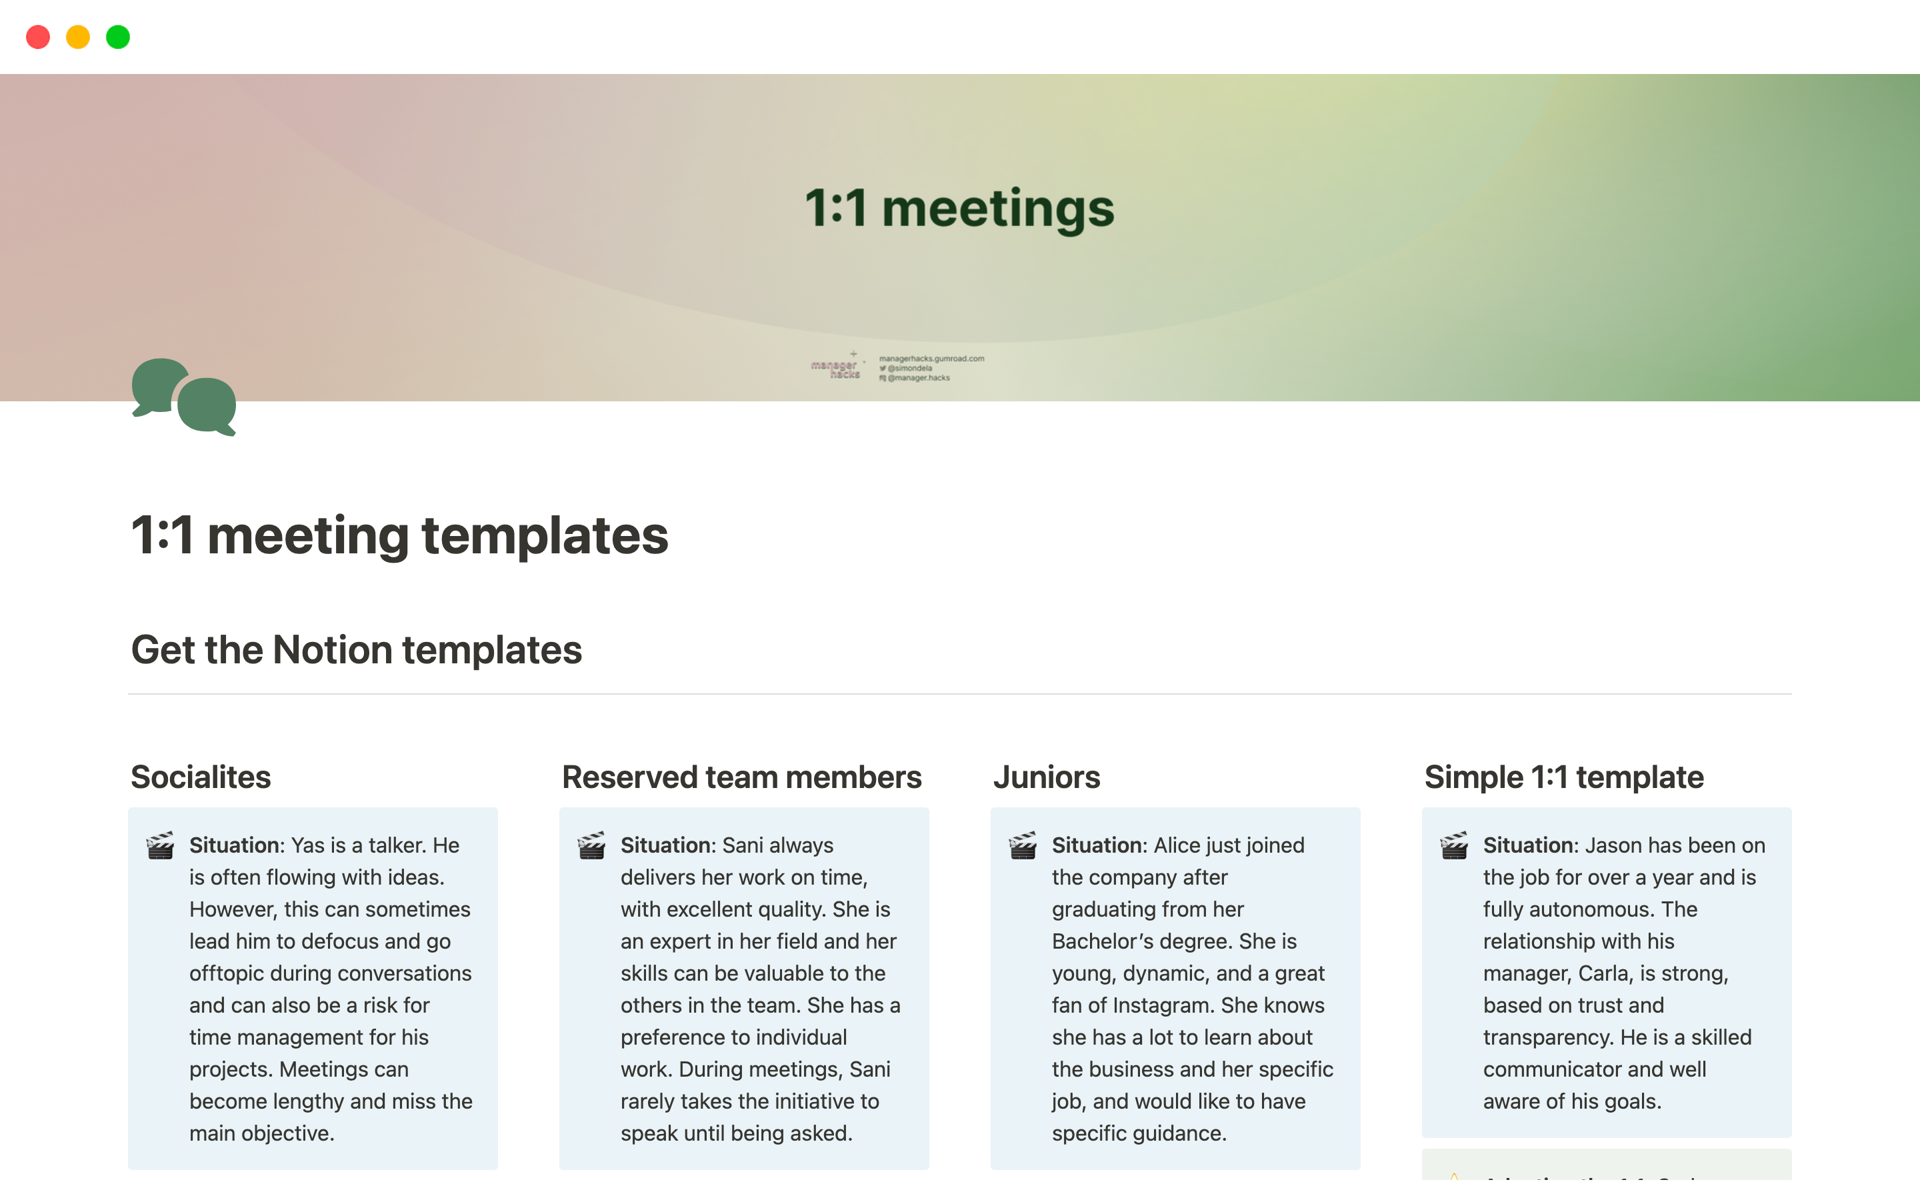 A template preview for 1:1 meeting - 4 templates to personalise your 1:1s